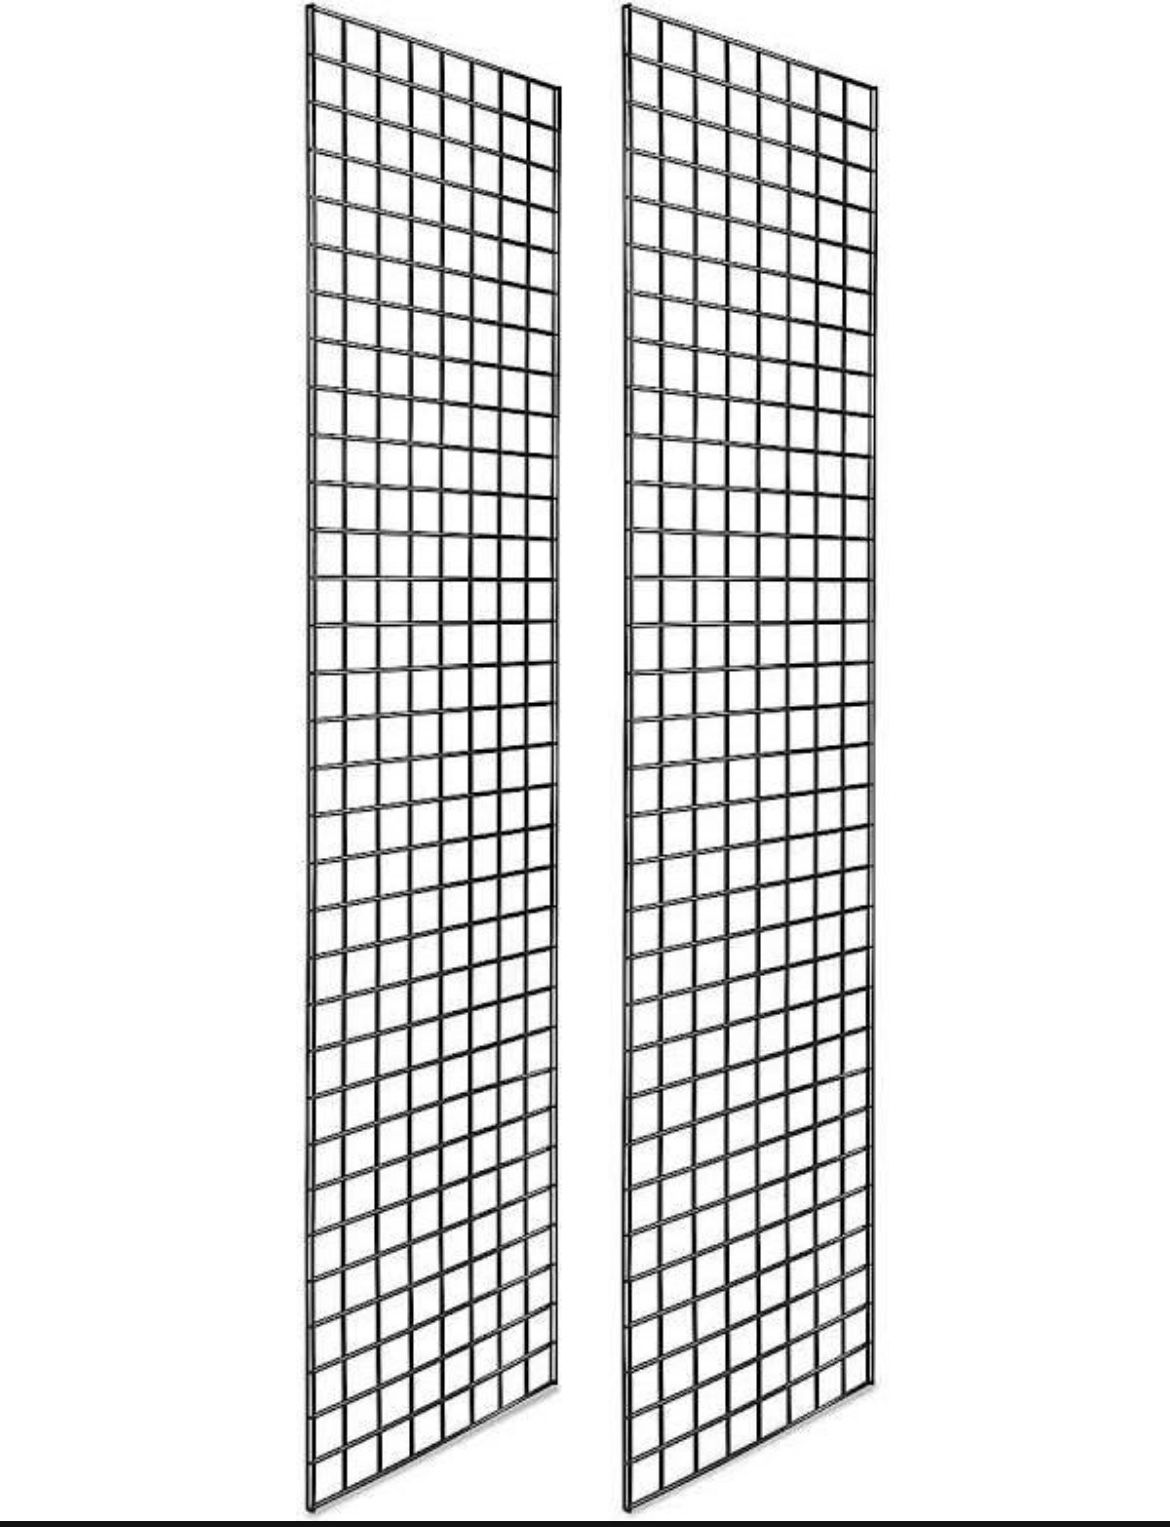 2’x7’ Commercial Black Panel Grid Wall | Sold By 10 Piece Set Only, $15 Each FIRM